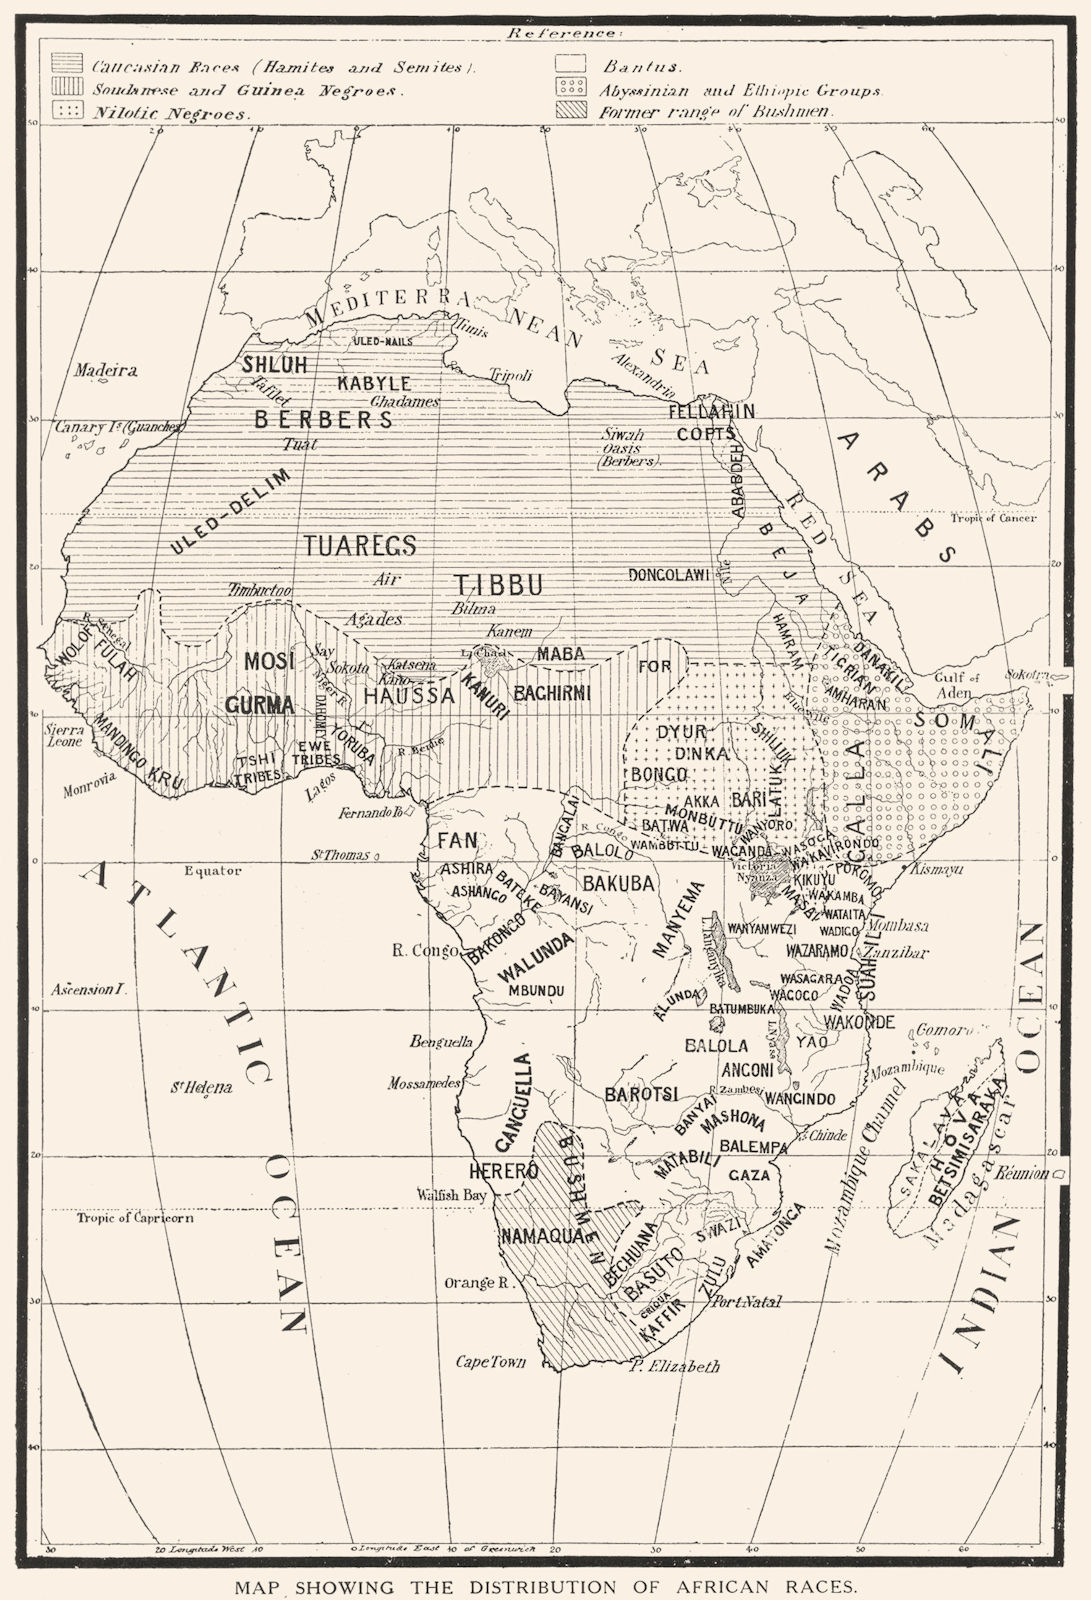 AFRICA. Sketch map showing the distribution of African Races tribes 1900